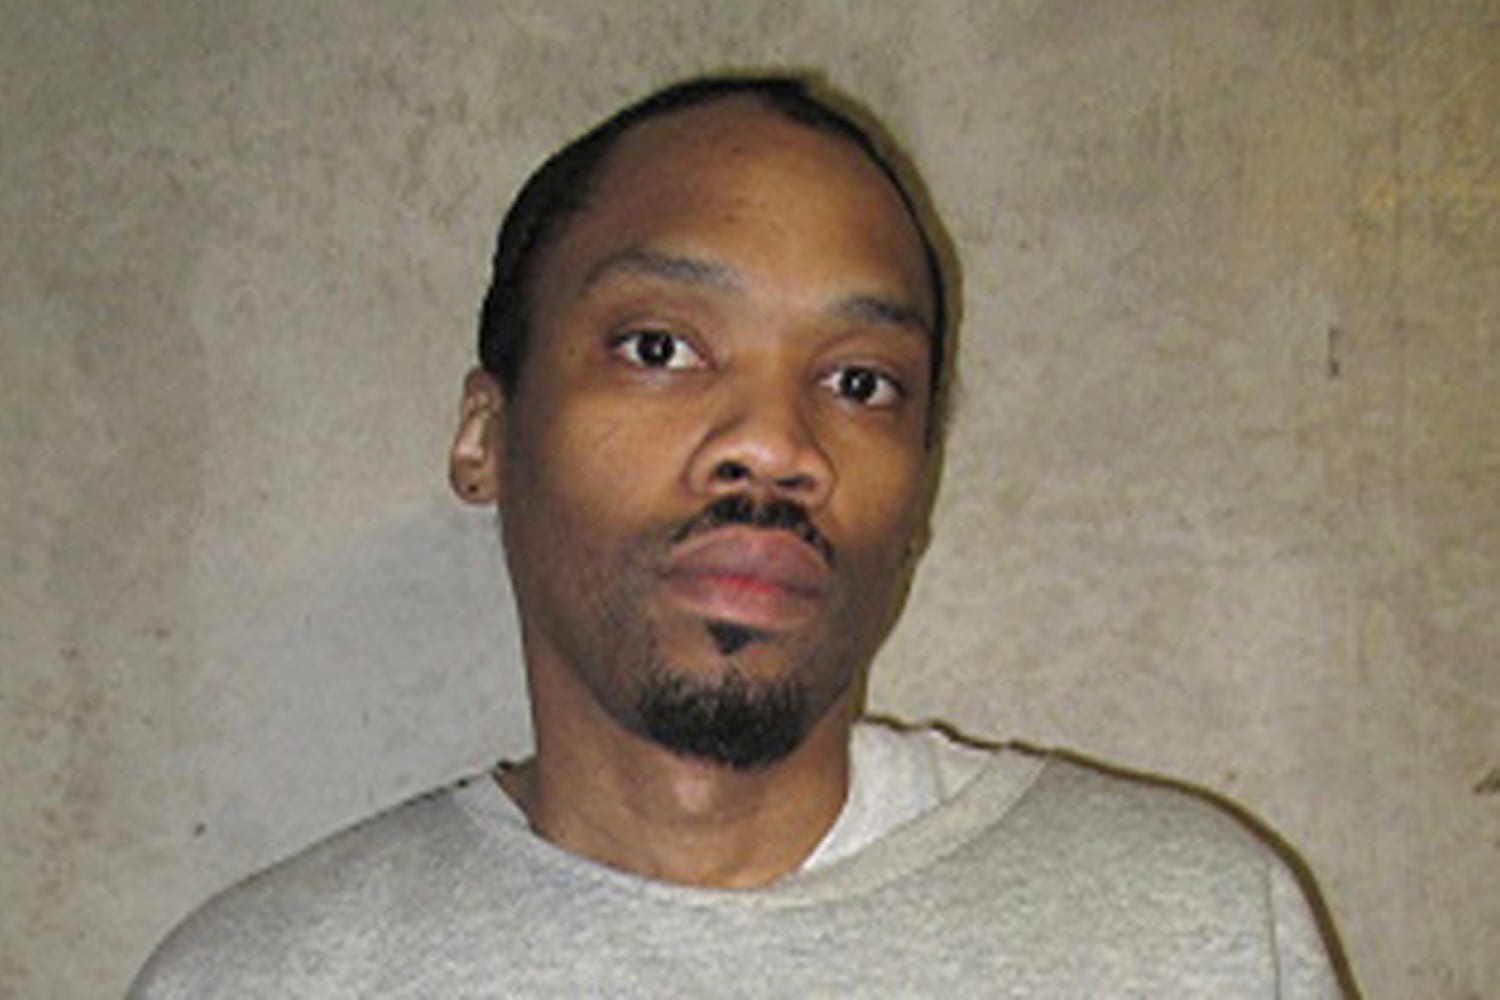 Supporters continue push for clemency for Julius Jones’ as execution nears